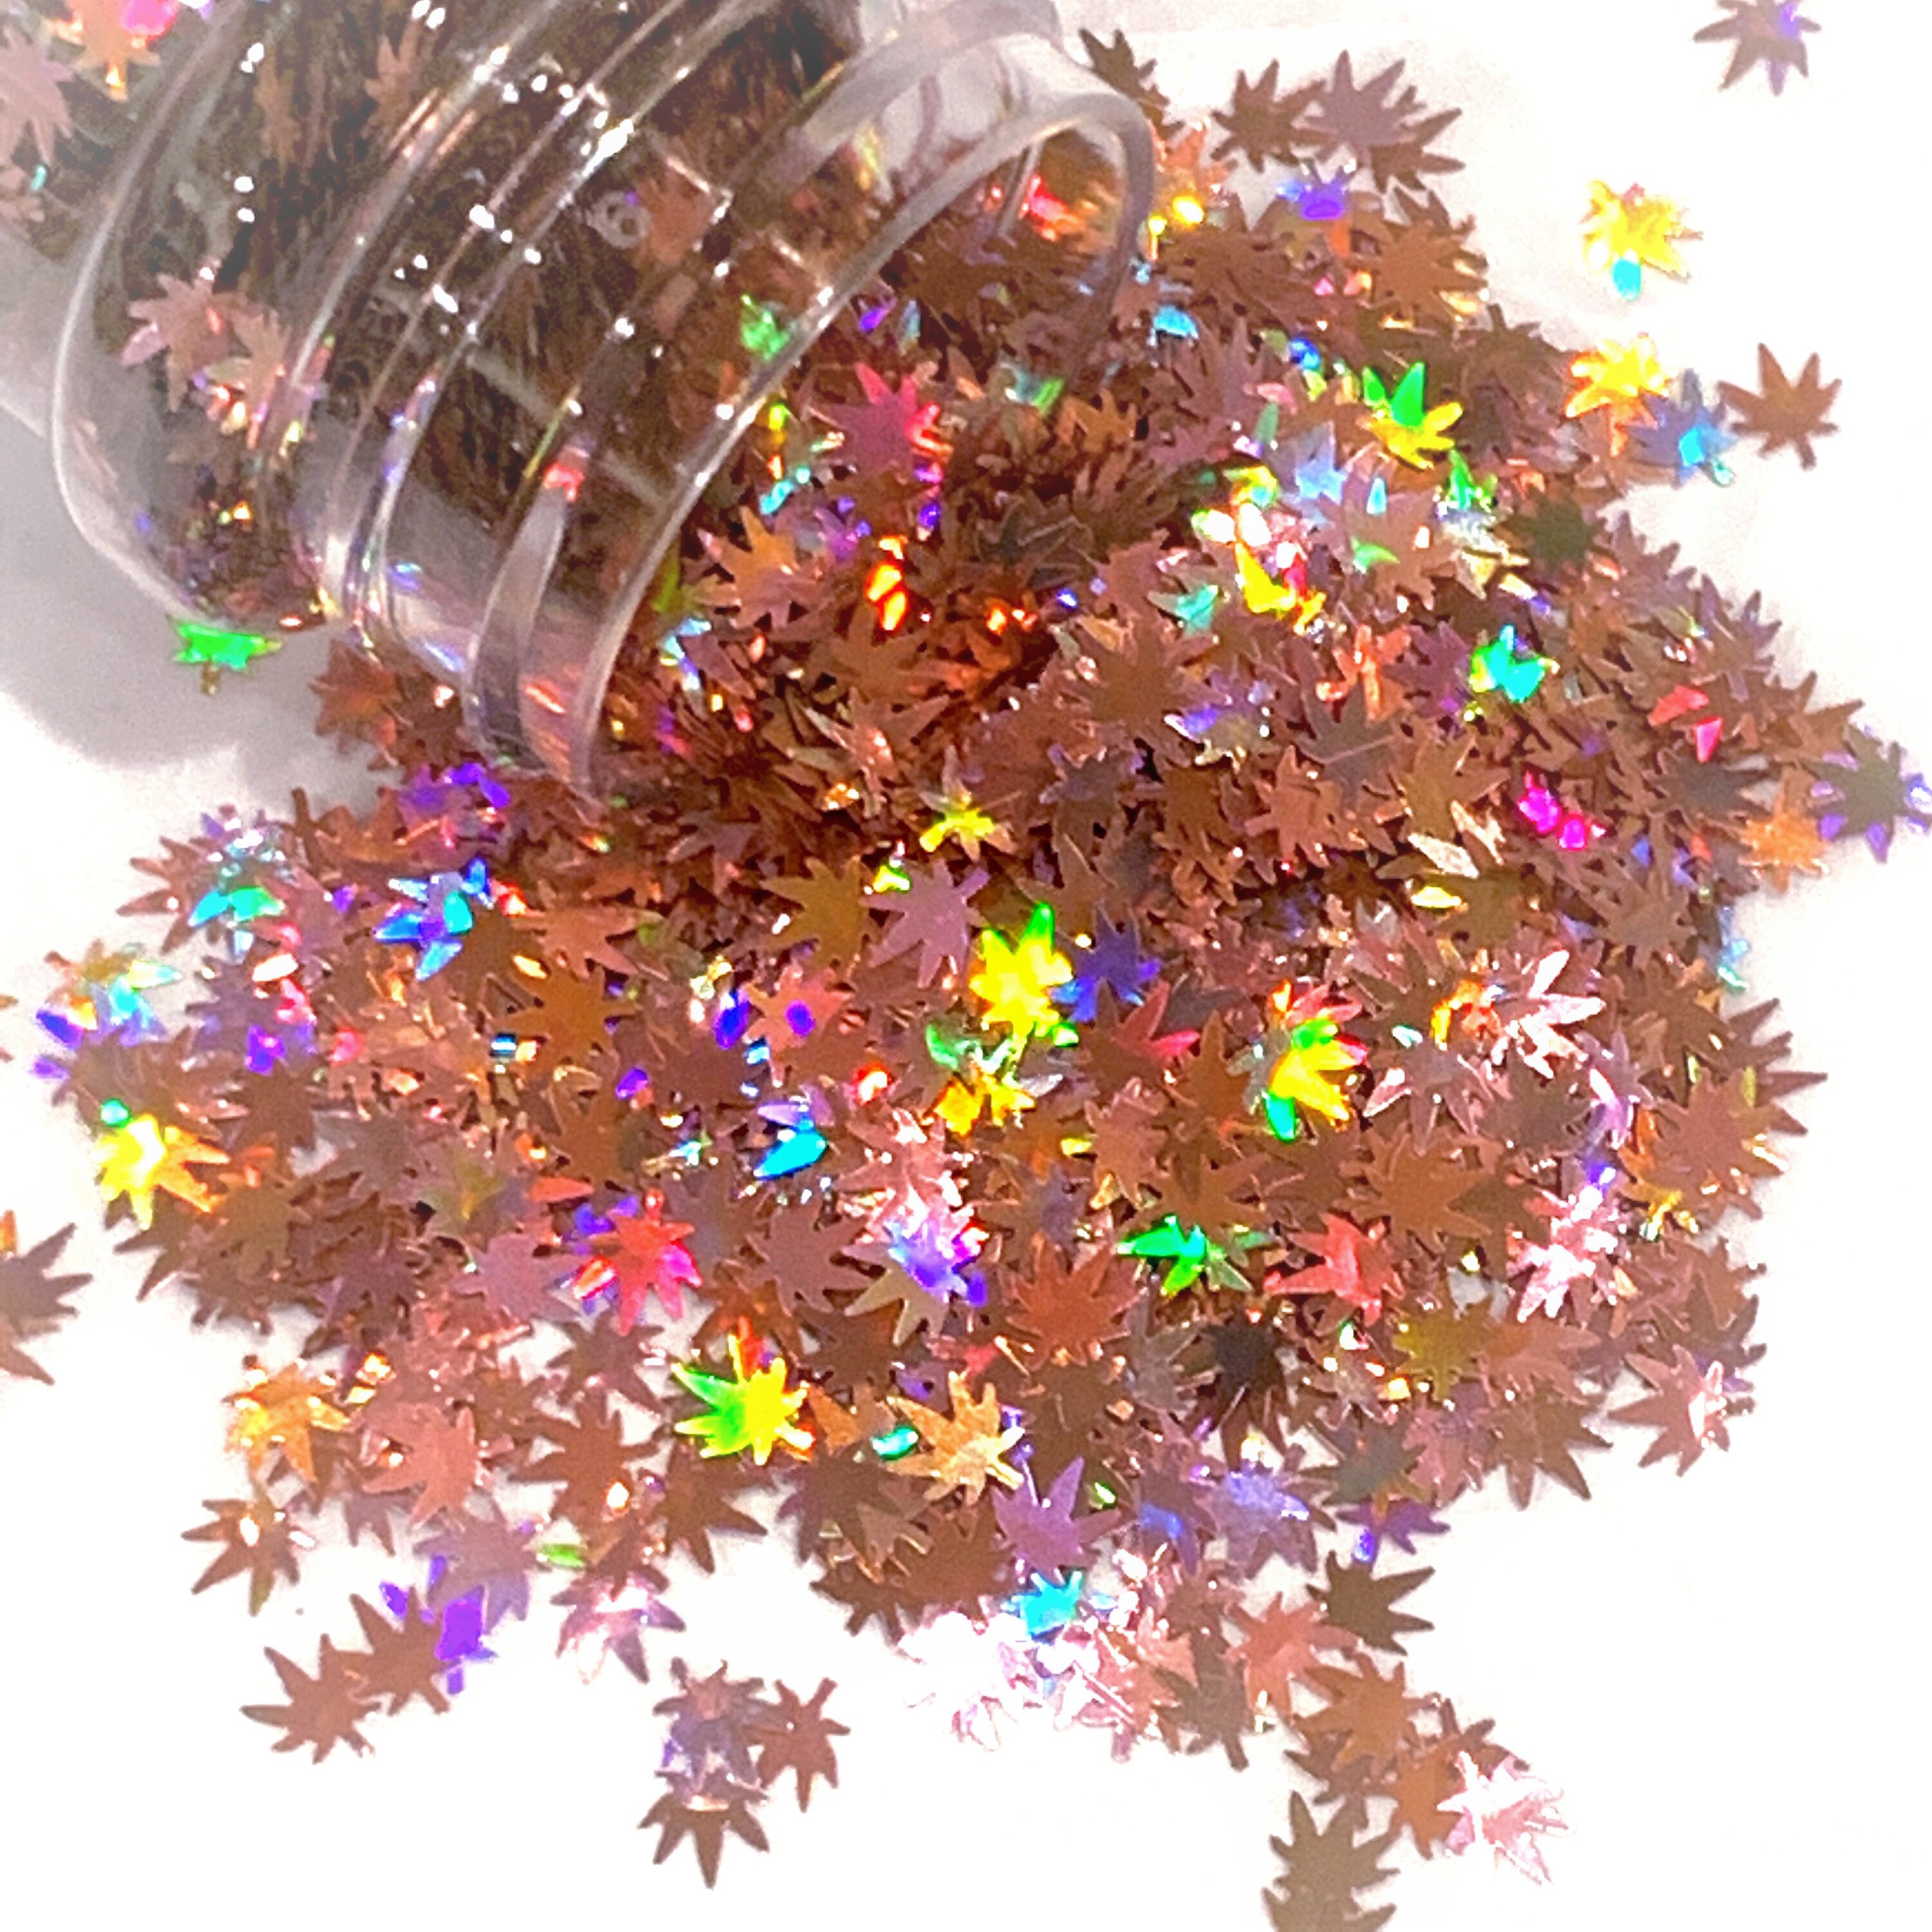 Snowflake Sequins Glitter Confetti for Craft Resin Slime Supplies 